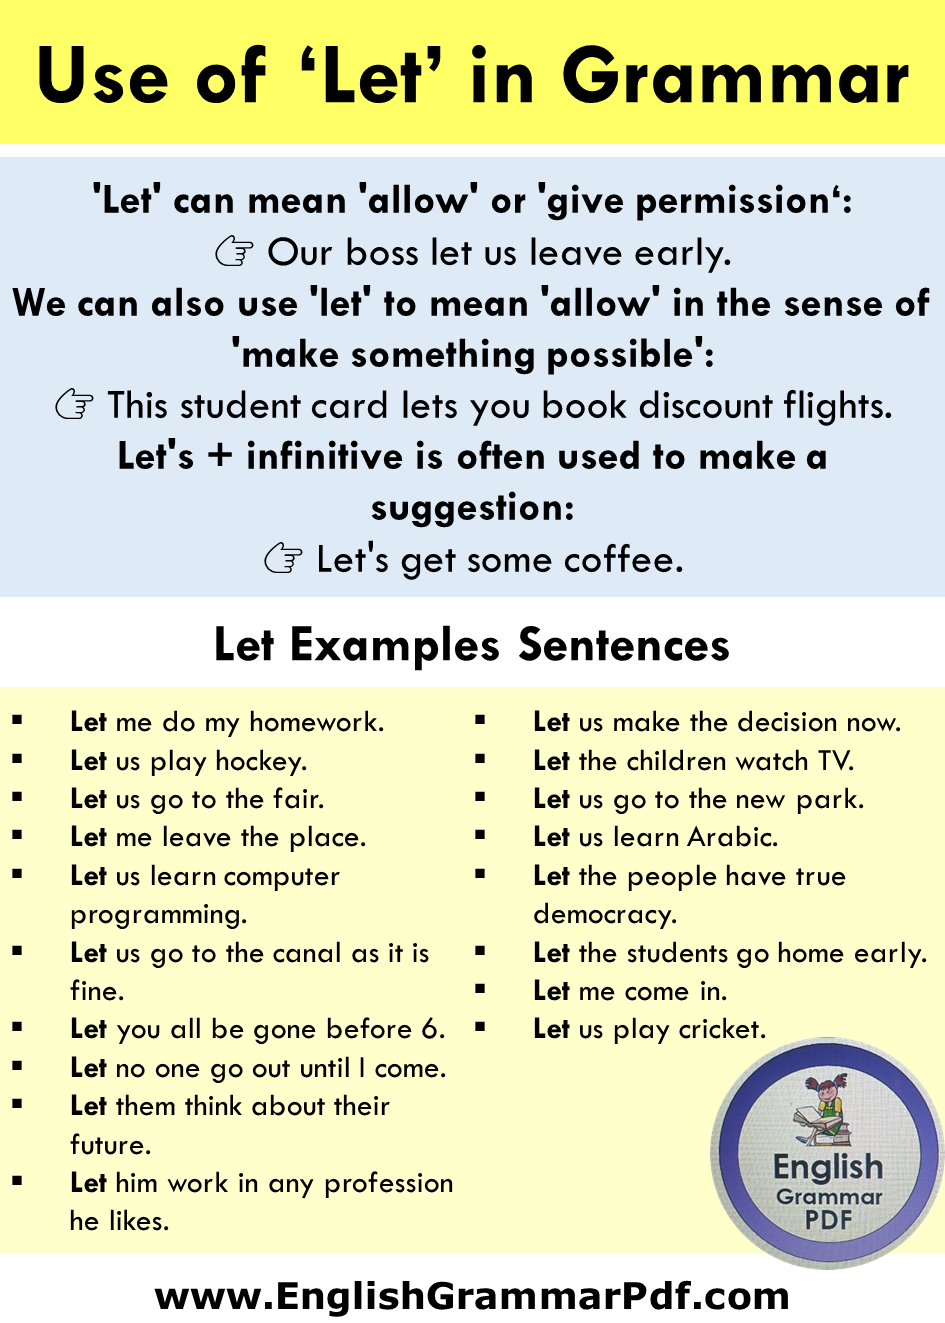 Let use in English grammar